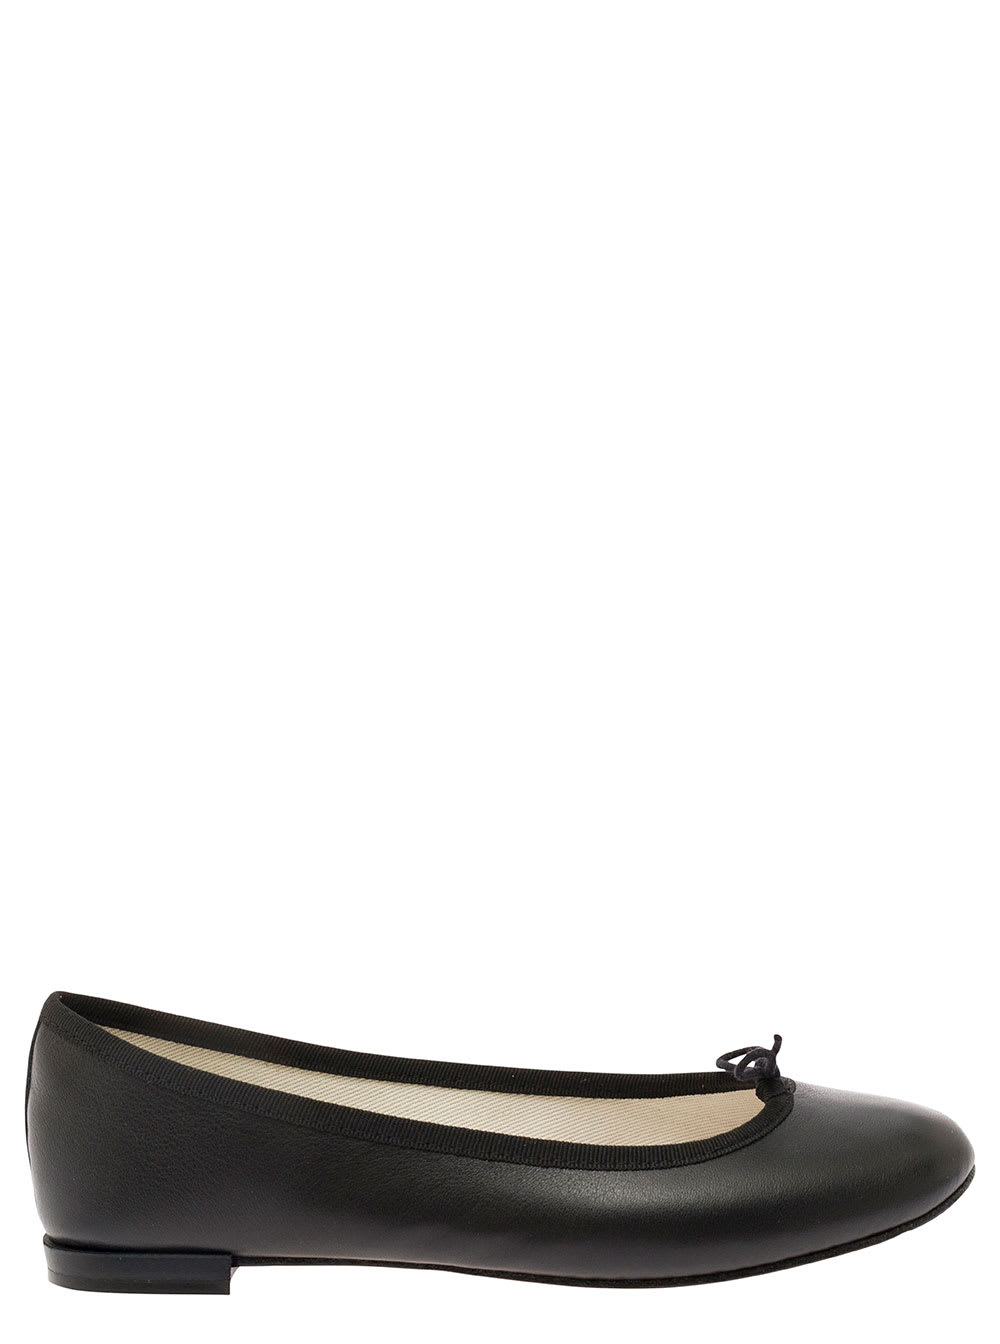 REPETTO CENDRILLON BLACK BALLET FLATS WITH BOW DETAIL IN SMOOTH LEATHER WOMAN